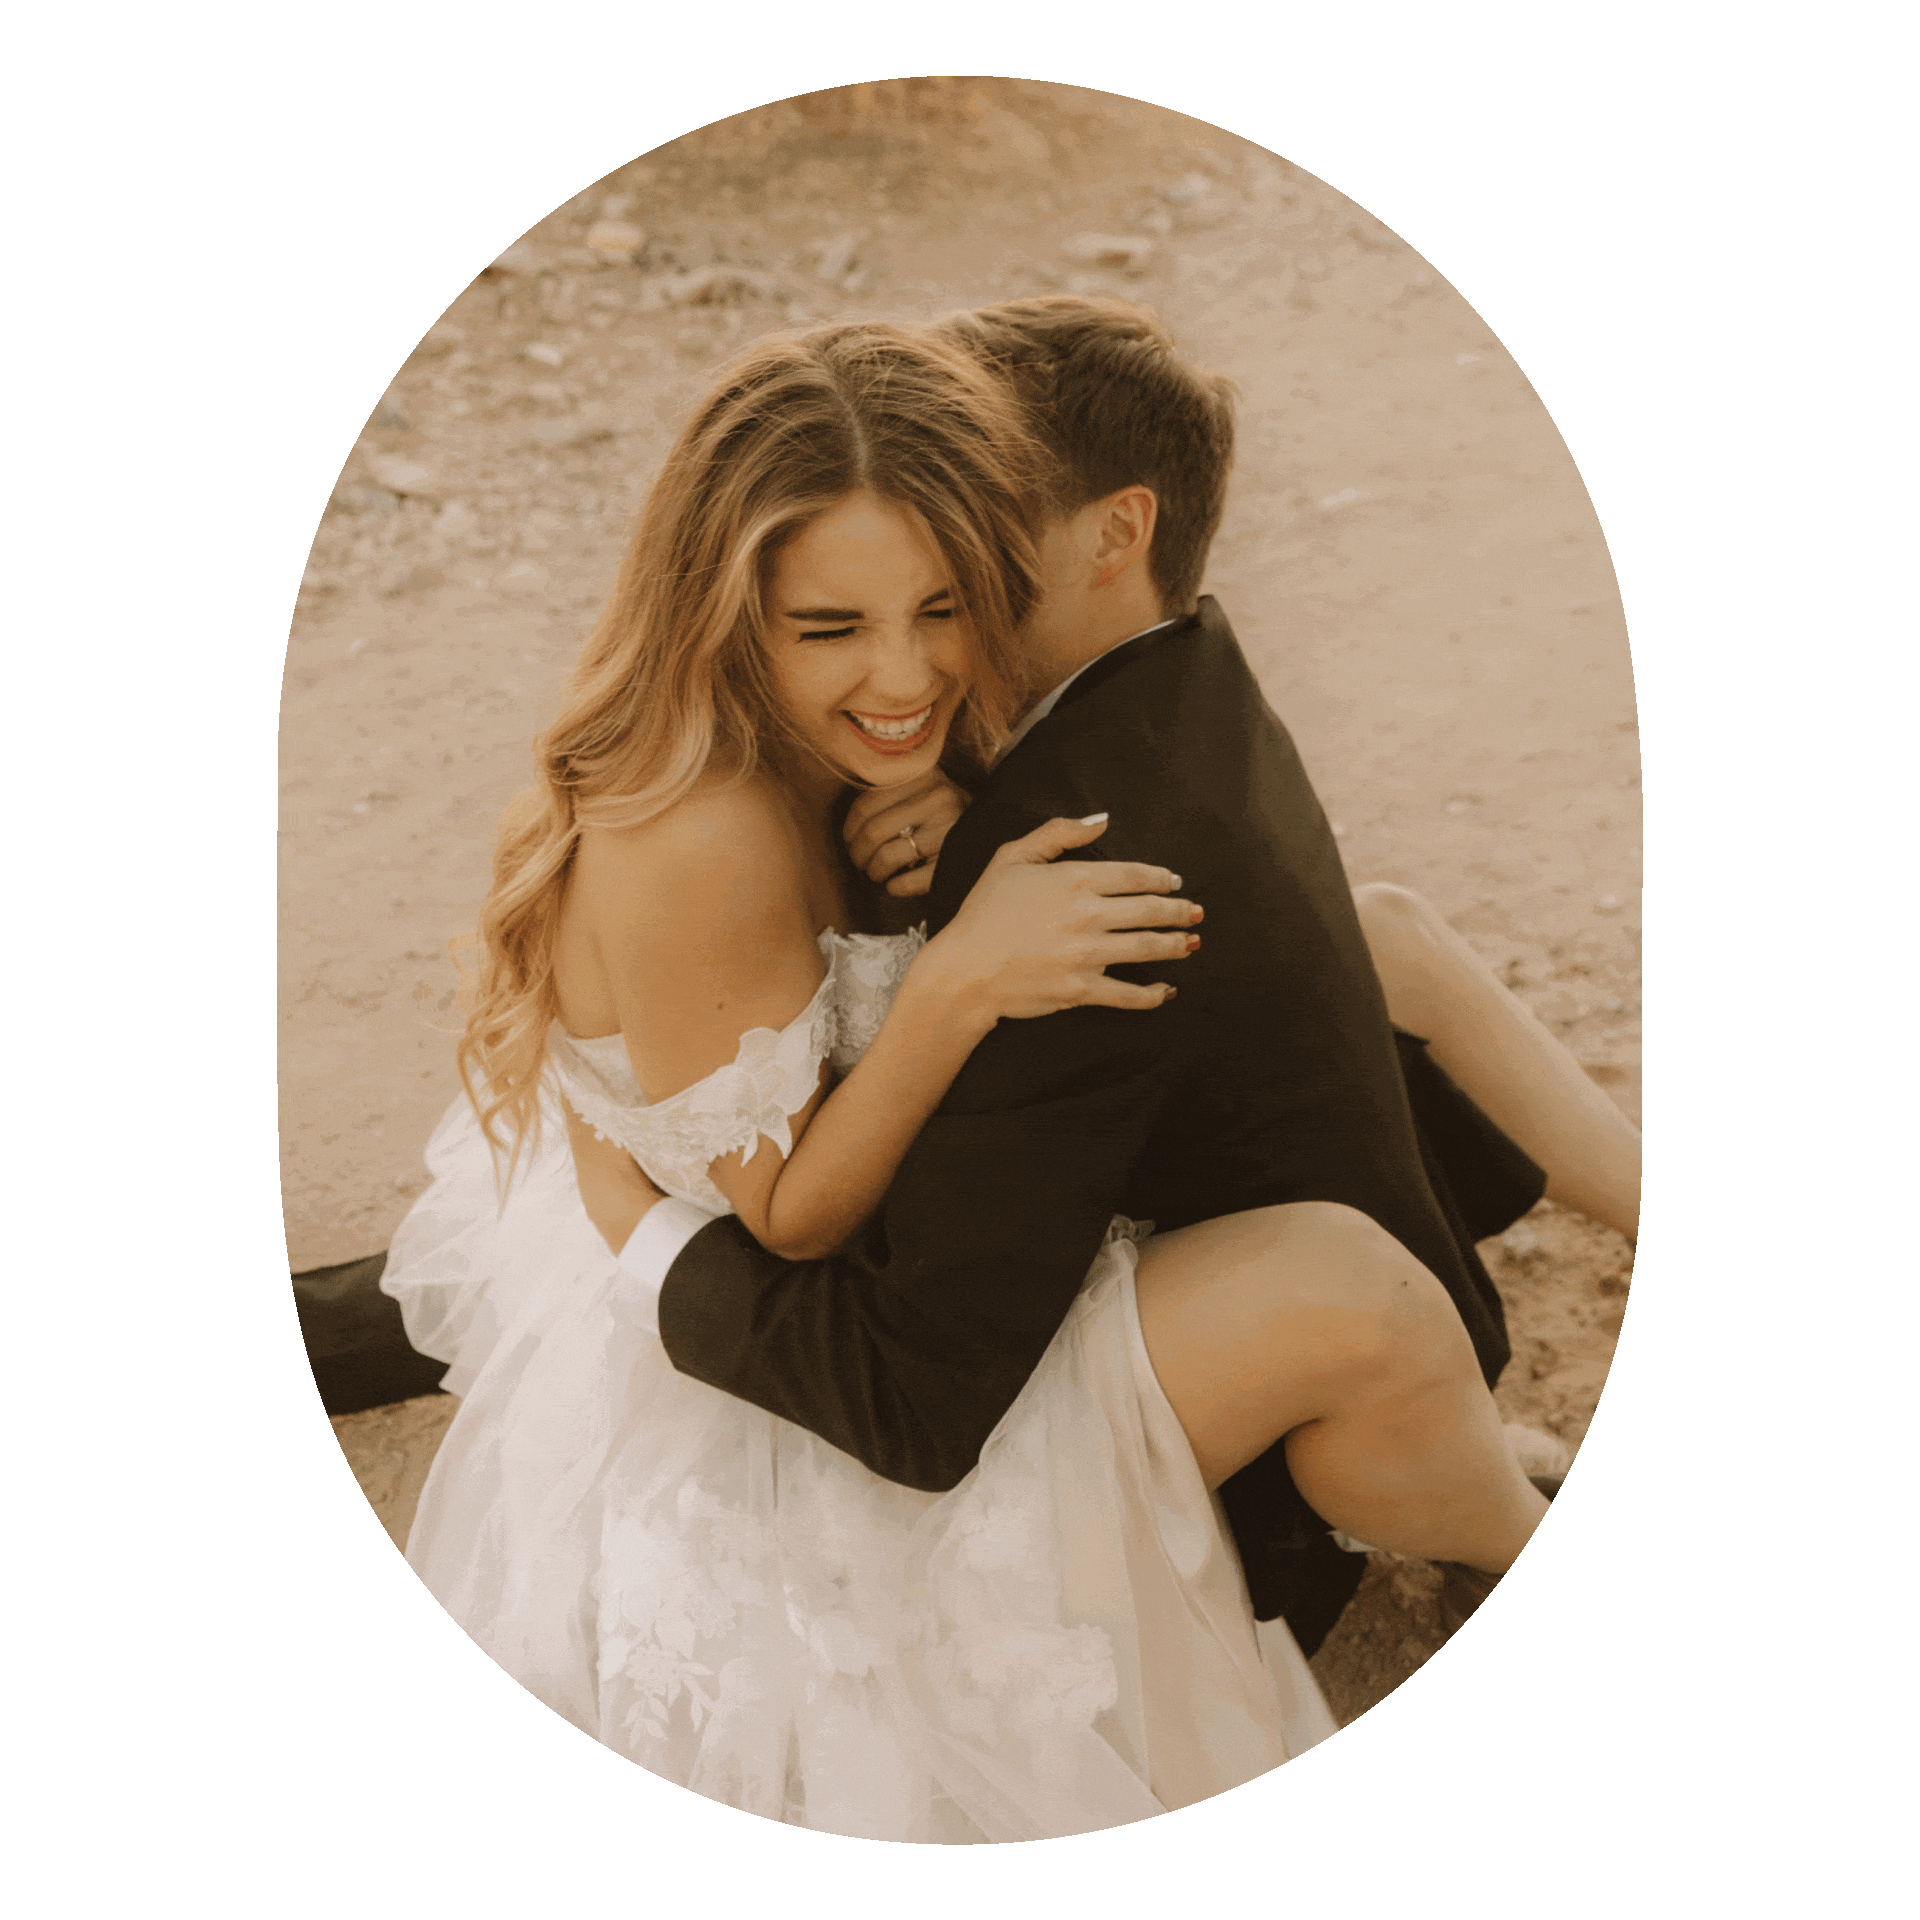 GIF of couples, wedding, and family photography services